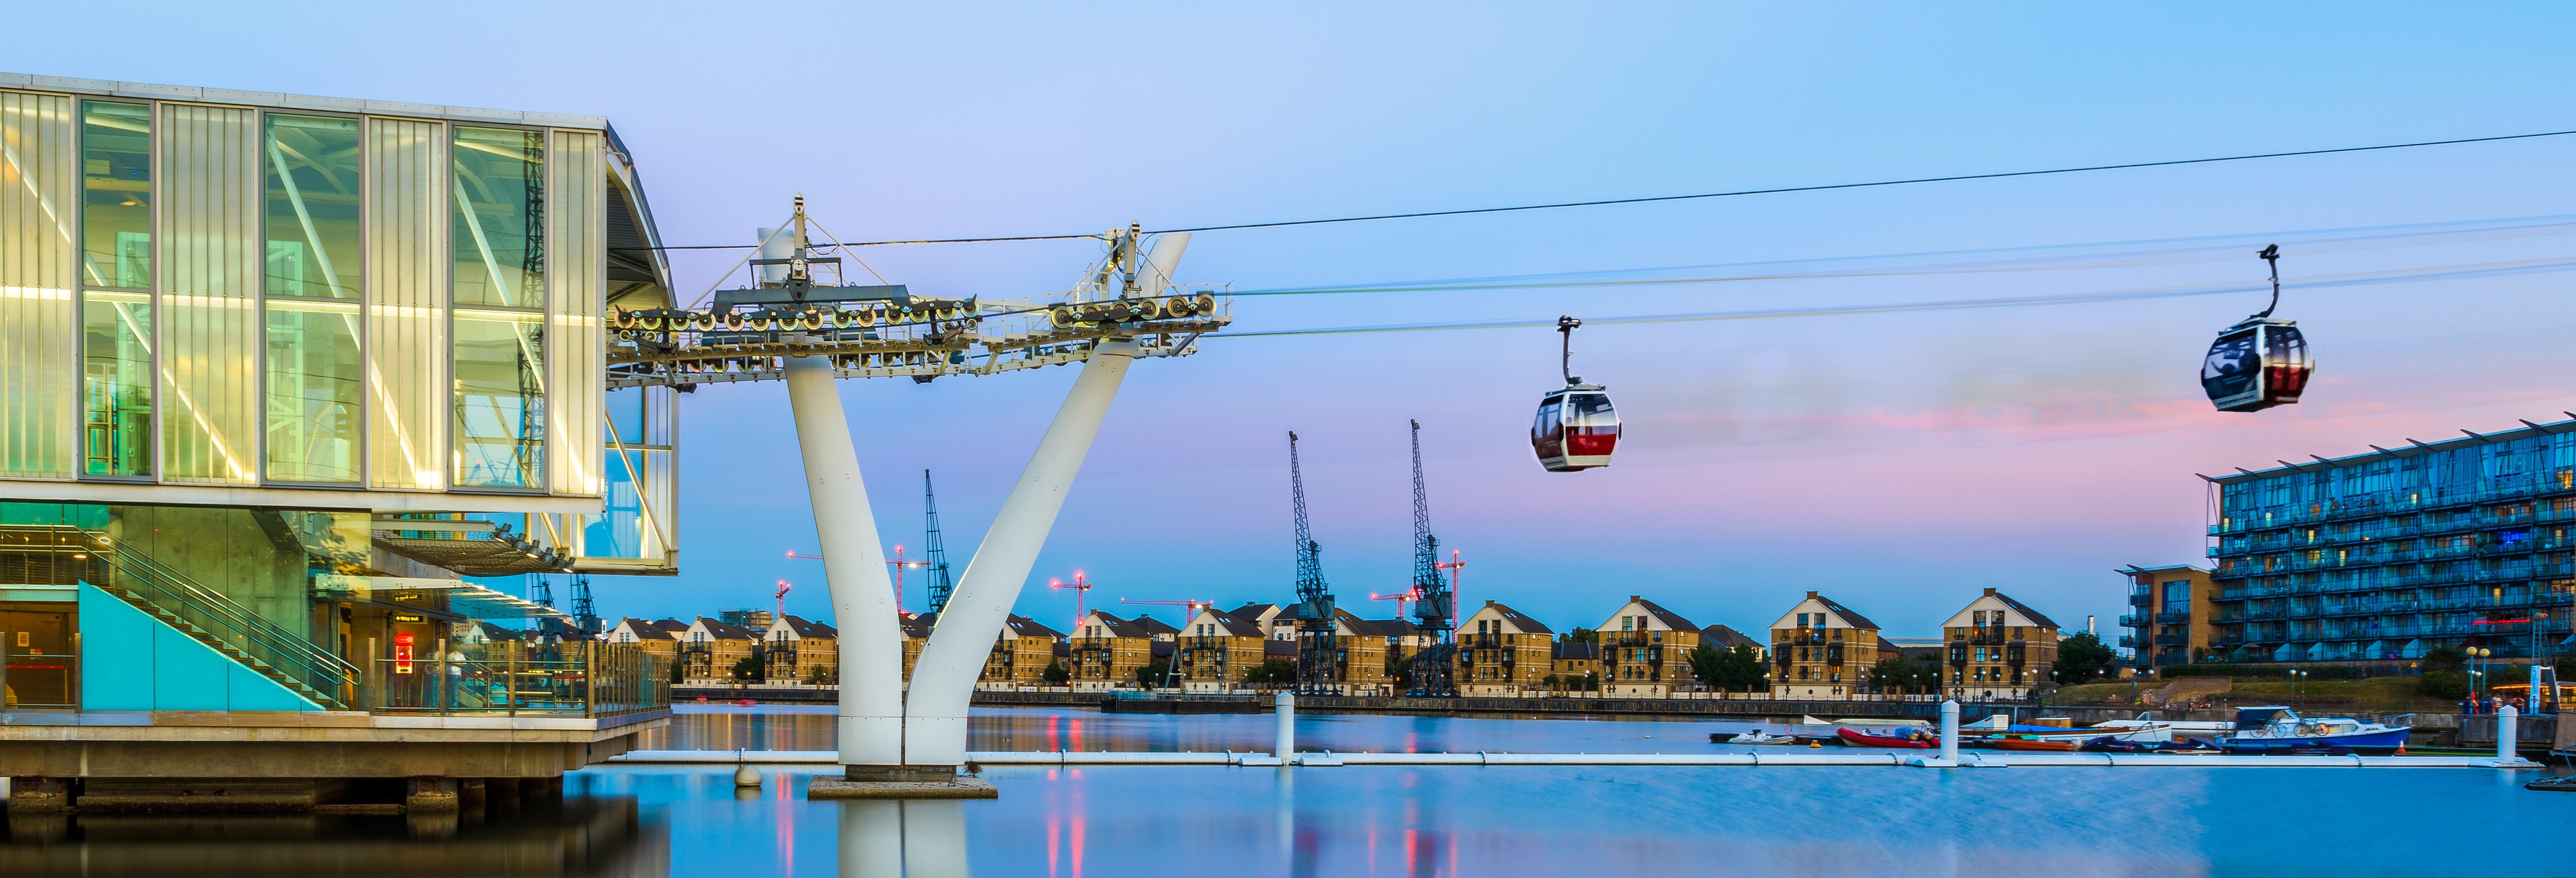 IFS Cloud Cable Car Tickets